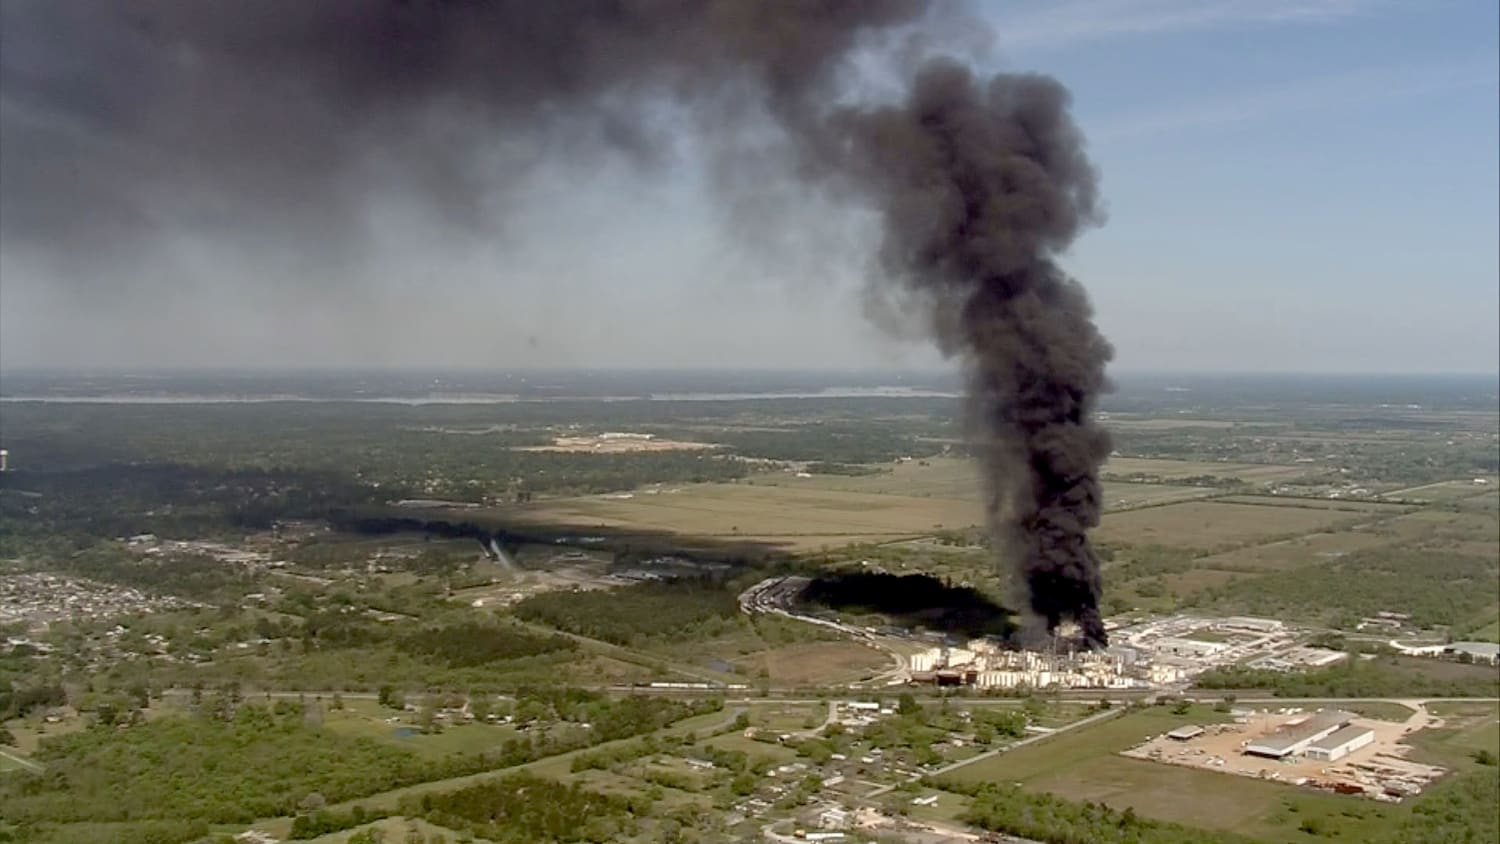 Flipboard: At least 1 dead, 2 injured in Houston area chemical plant fire1920 x 1080